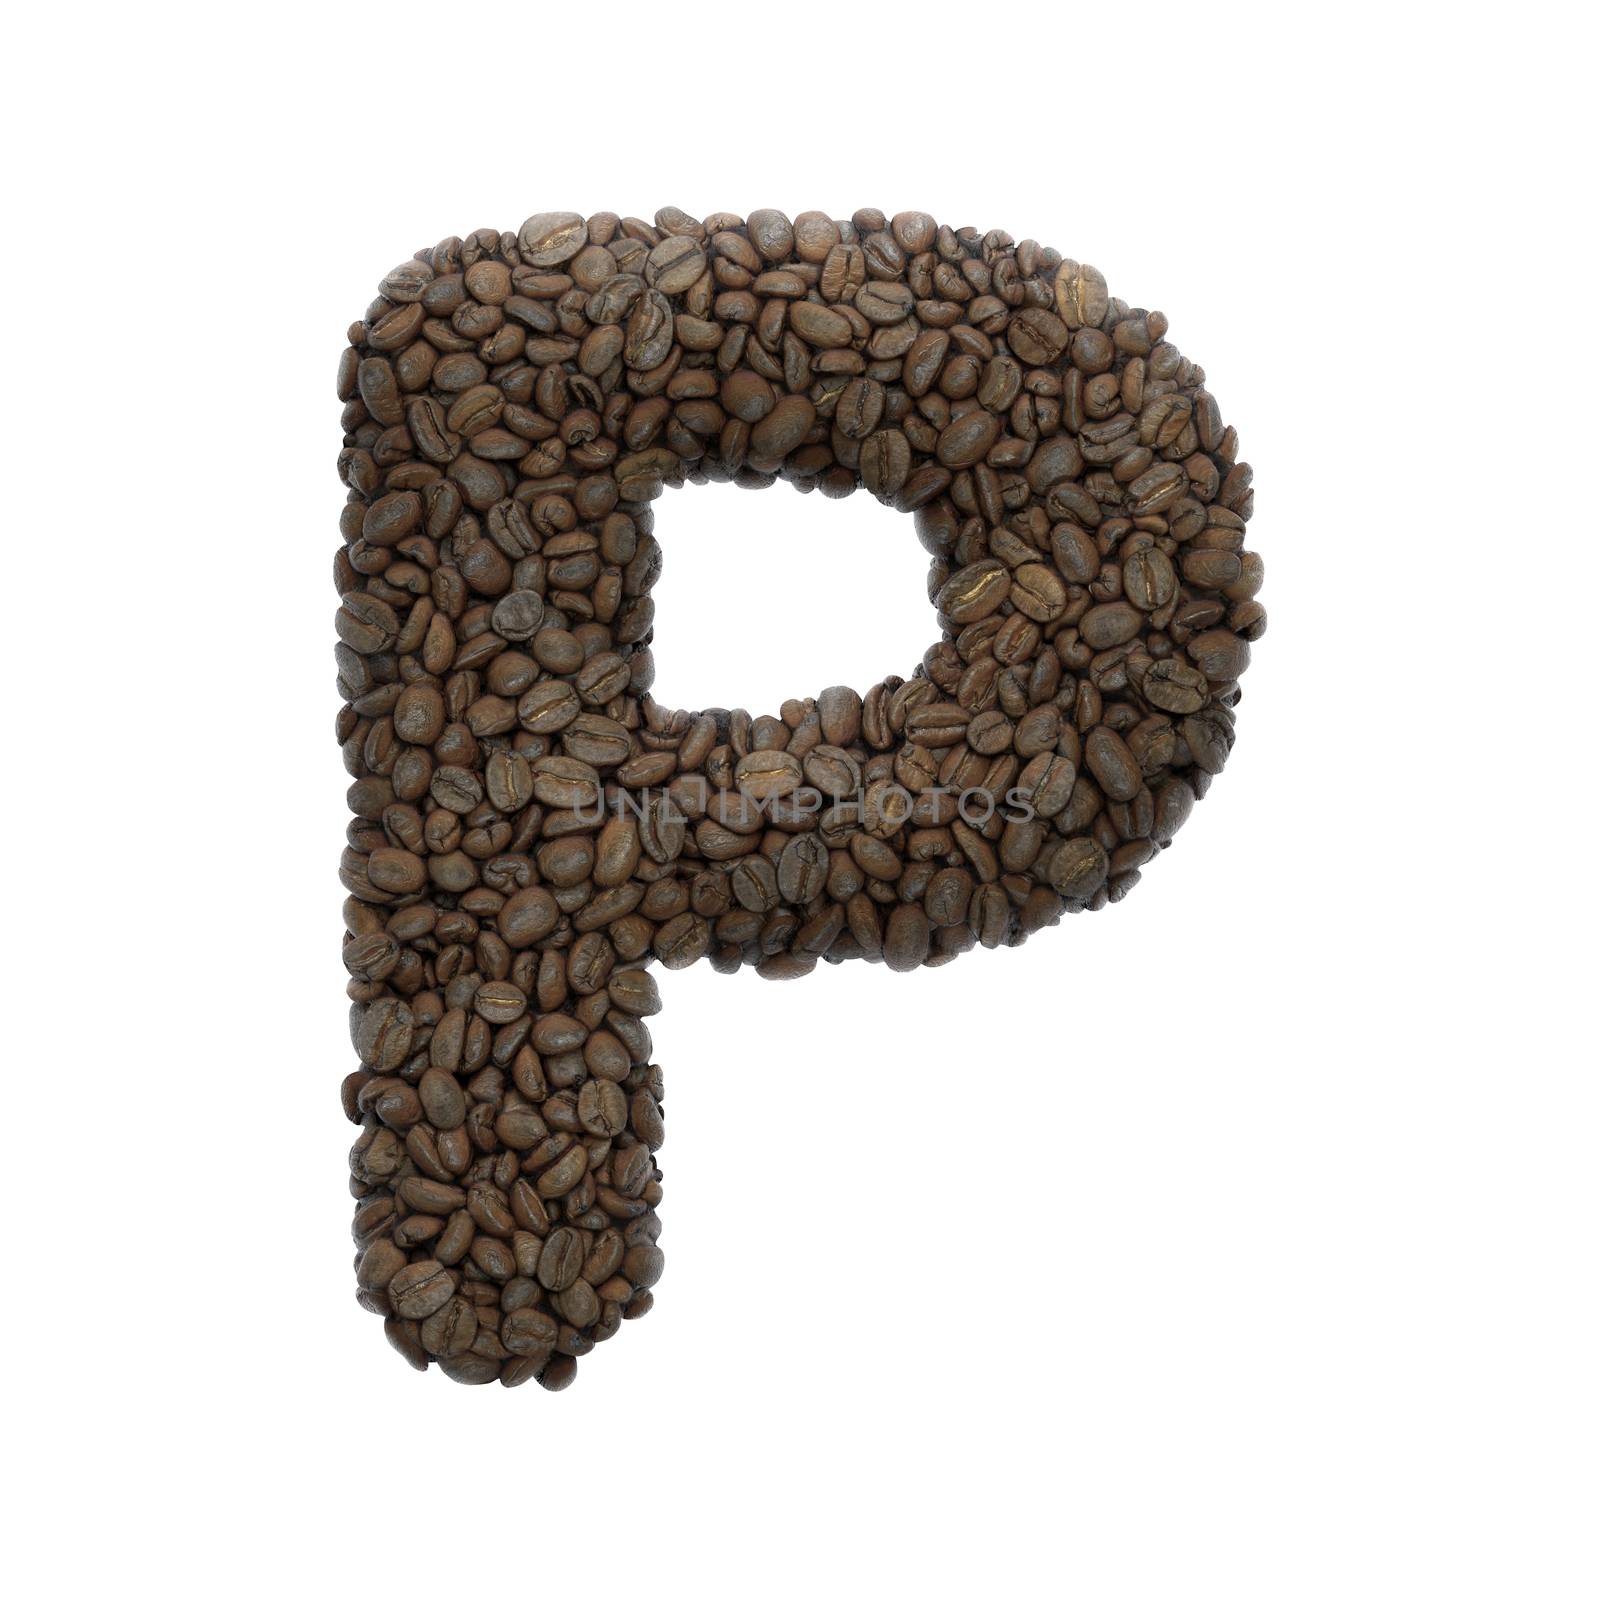 Coffee letter P - Upper-case 3d roasted beans font - suitable for Coffee, energy or insomnia related subjects by chrisroll